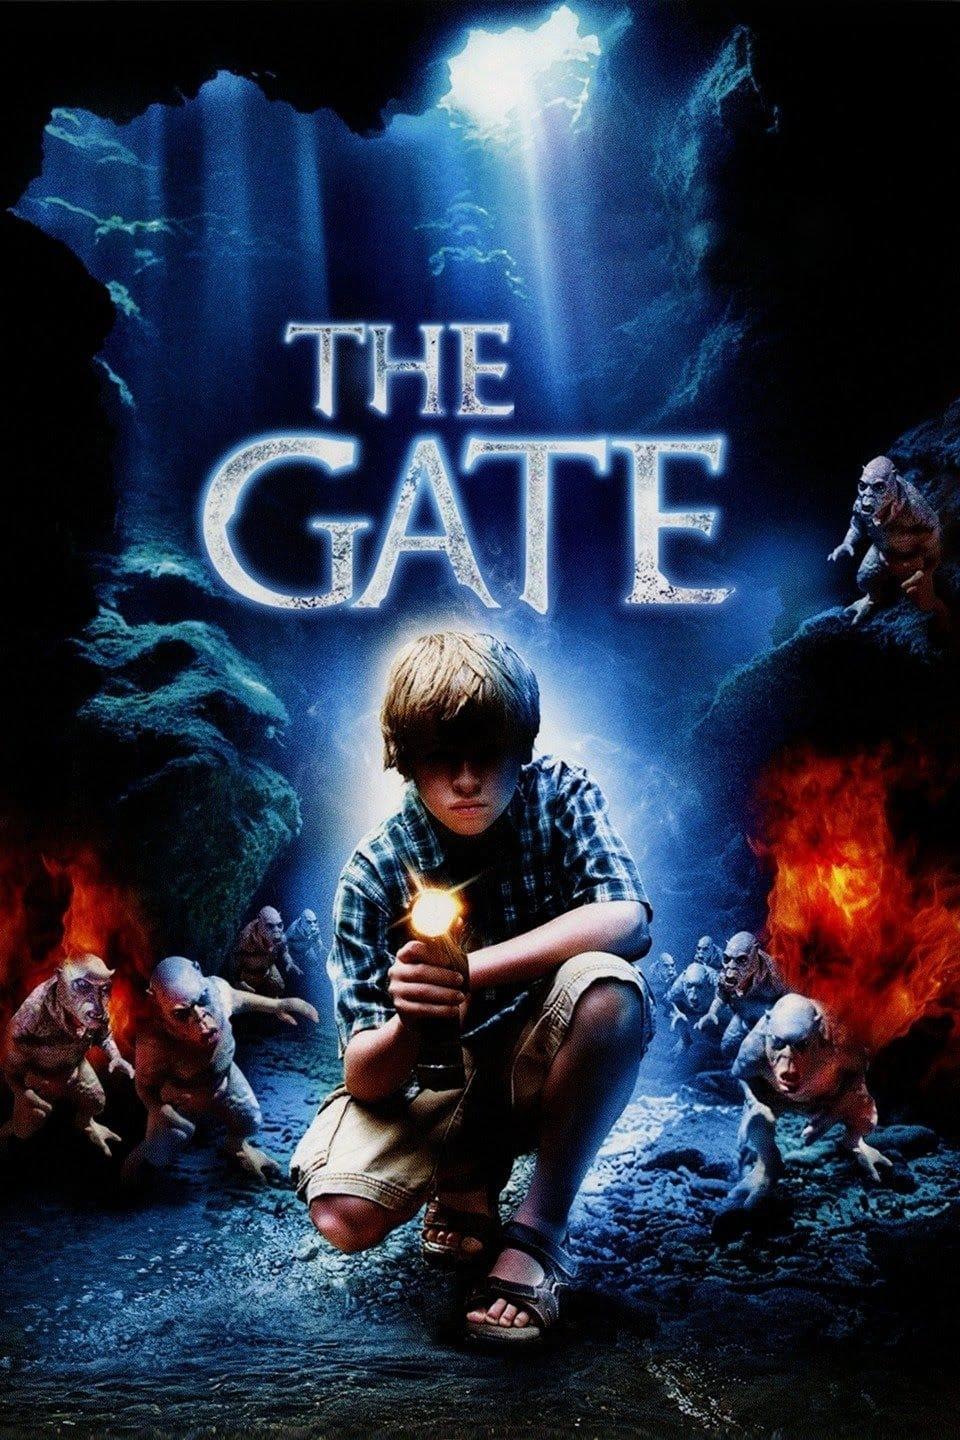 The Gate poster